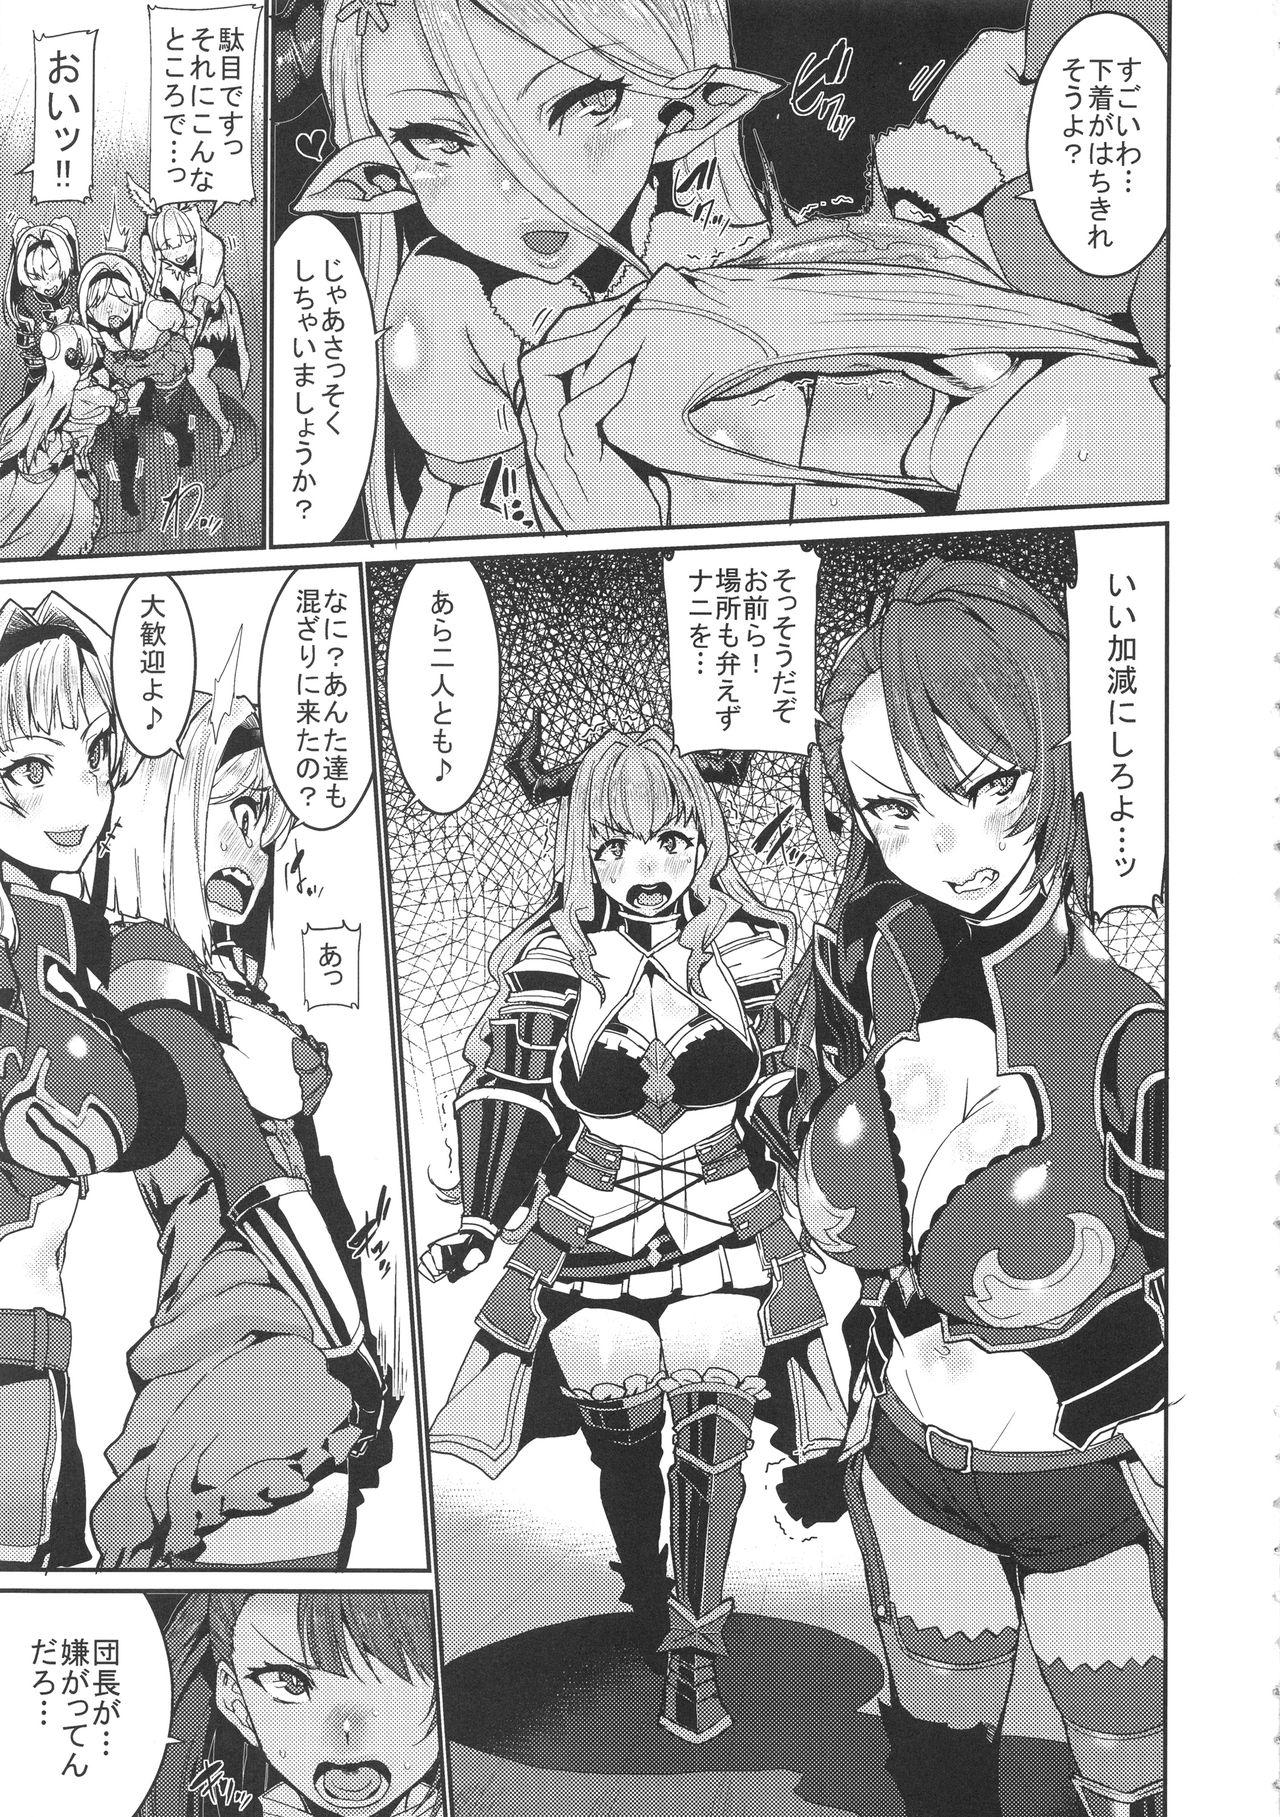 Awesome Be covered, be smeared - Granblue fantasy Filipina - Page 7